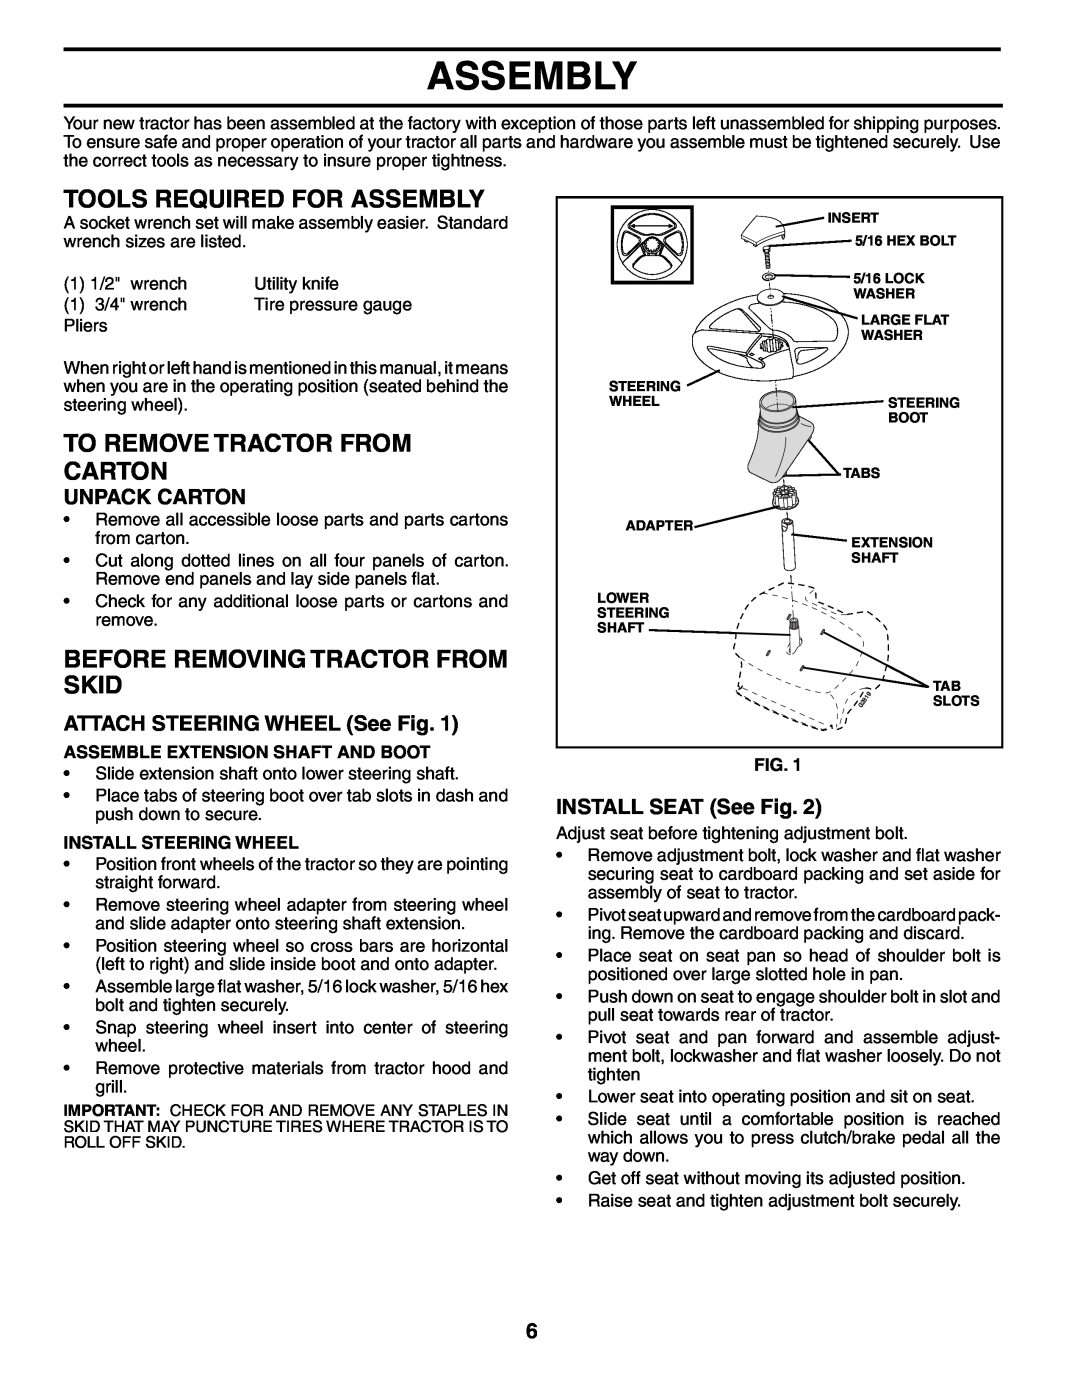 Weed Eater HD13538 manual Tools Required For Assembly, To Remove Tractor From Carton, Before Removing Tractor From Skid 